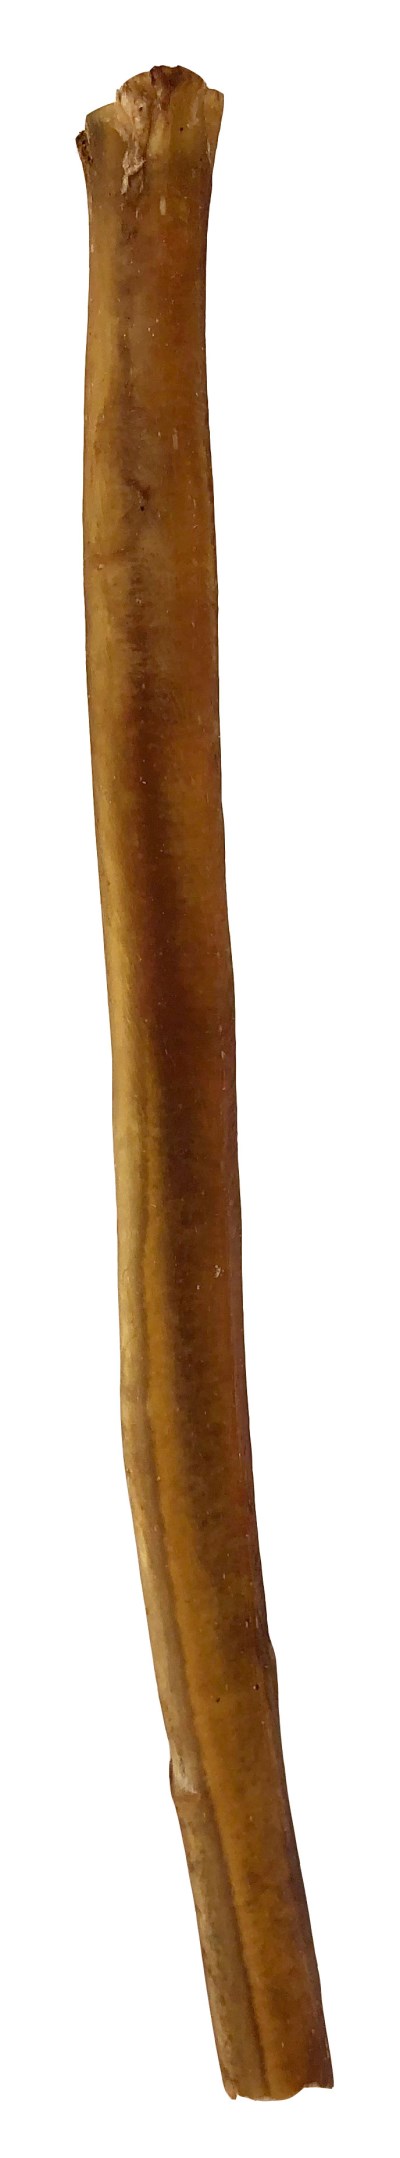 Made In South America Dog Chew - Bully Stick - 12 in-each